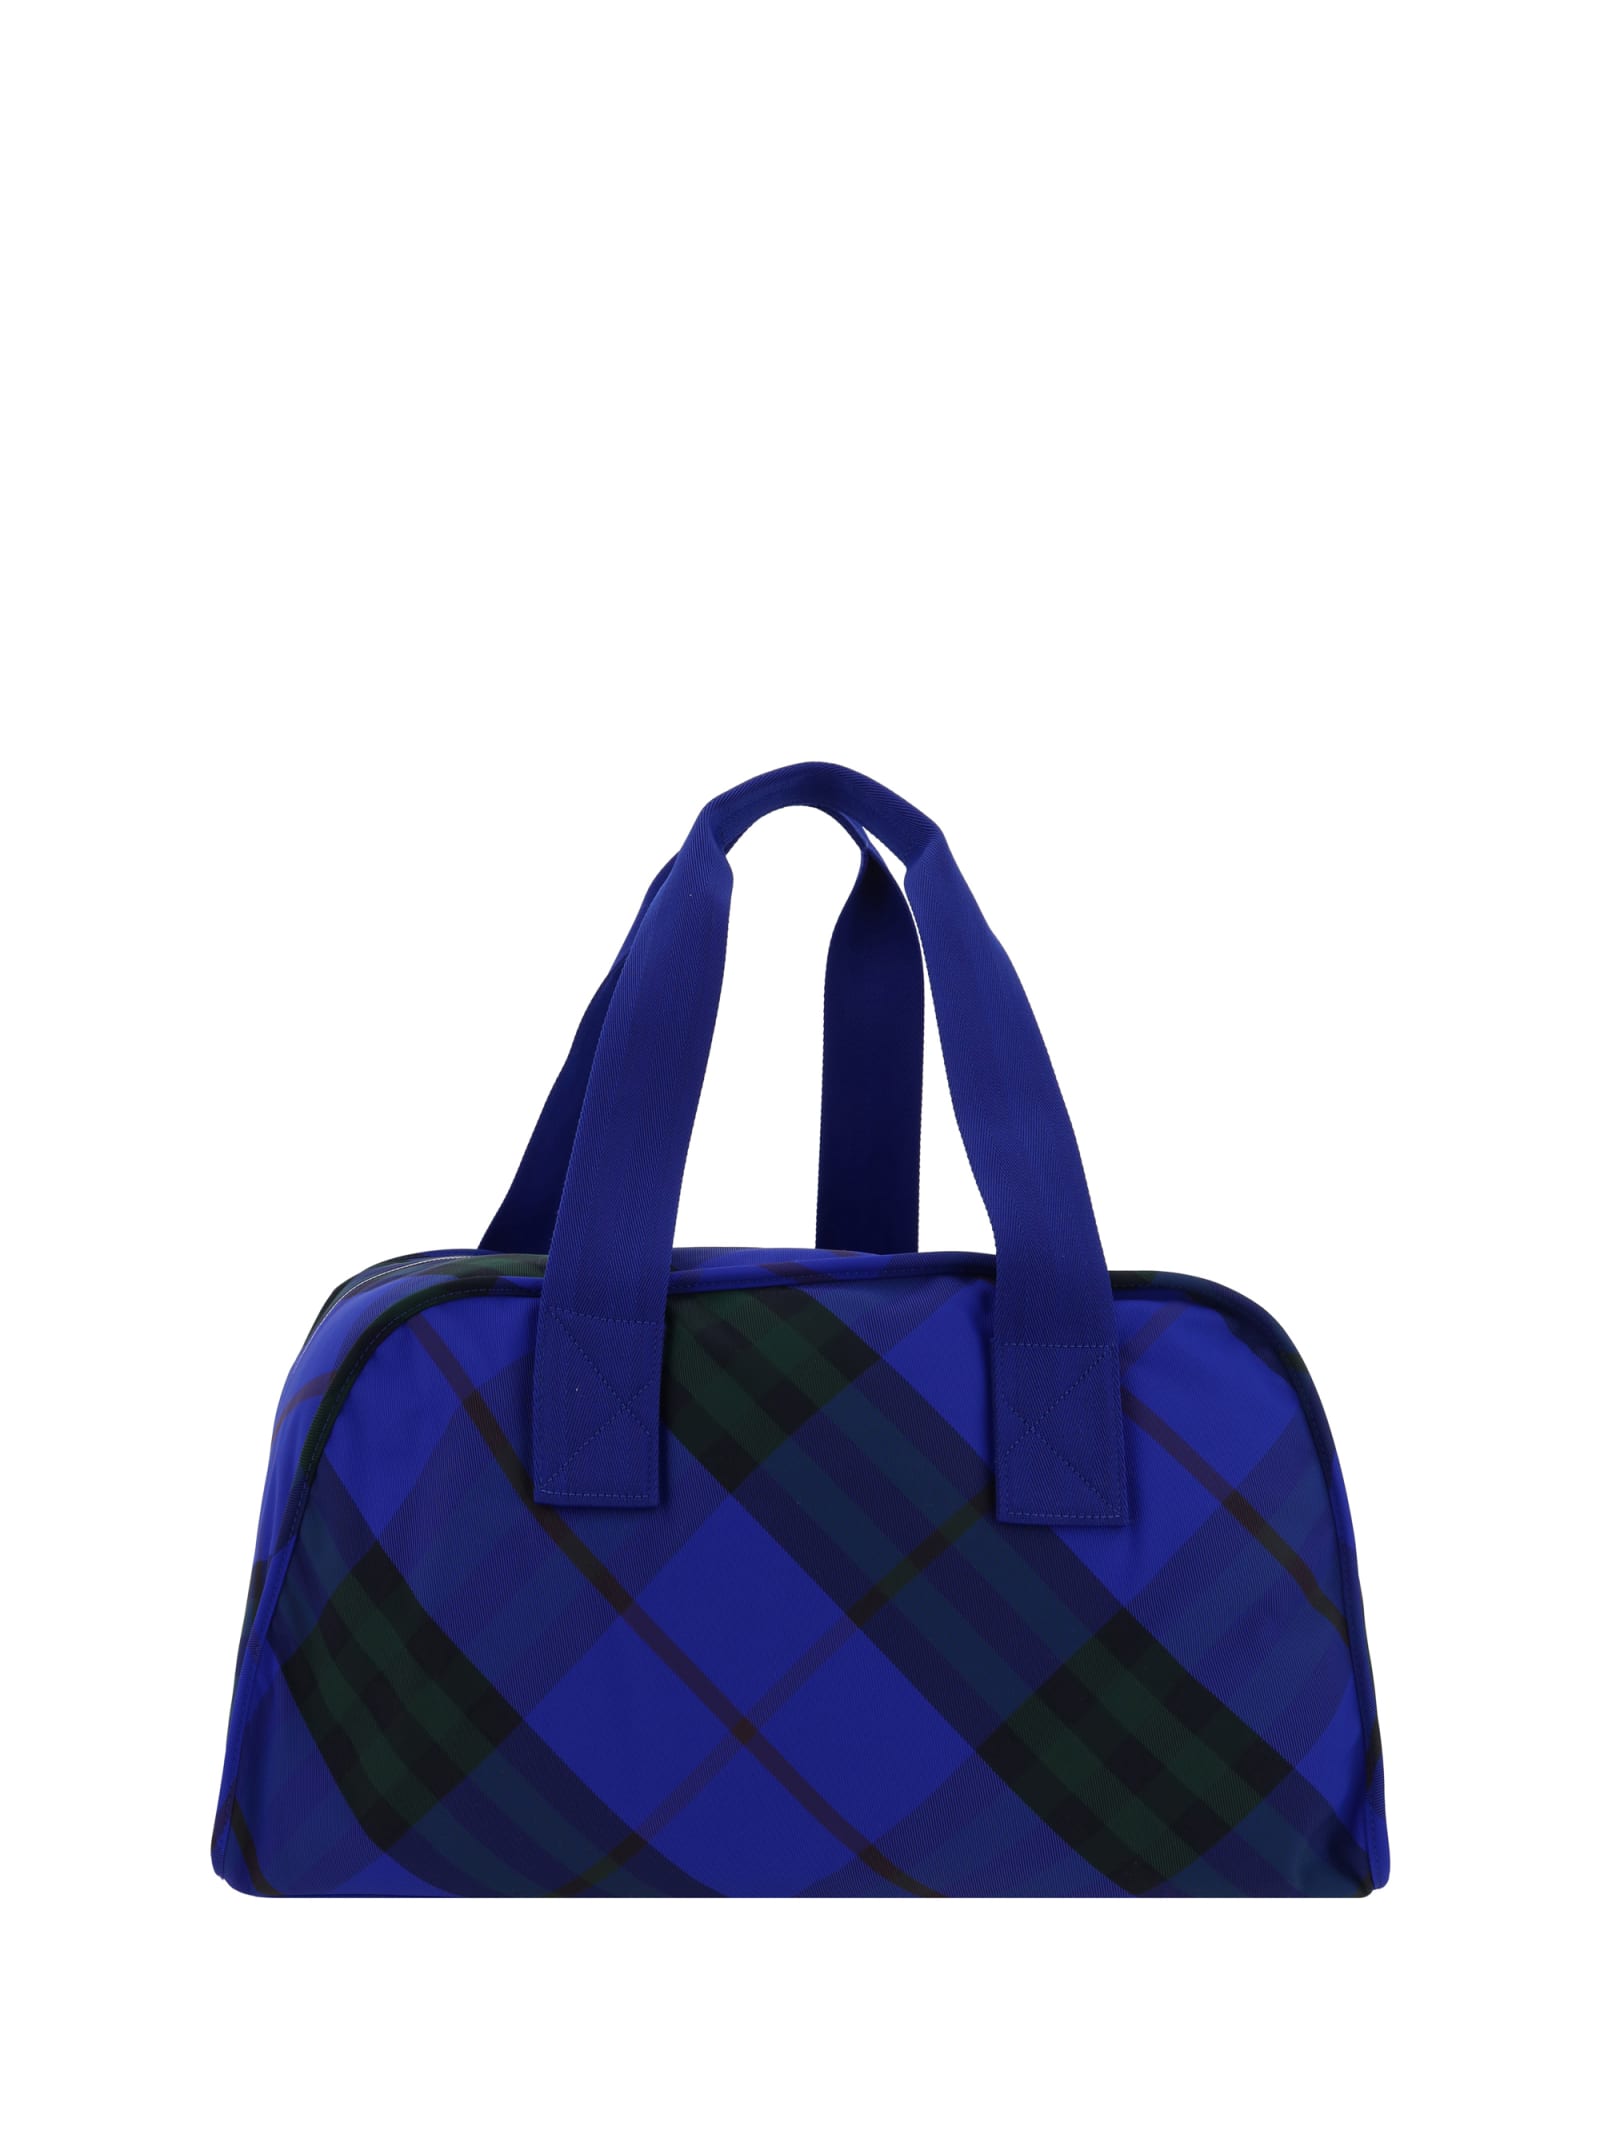 Burberry Holdall Travel Bag In Knight